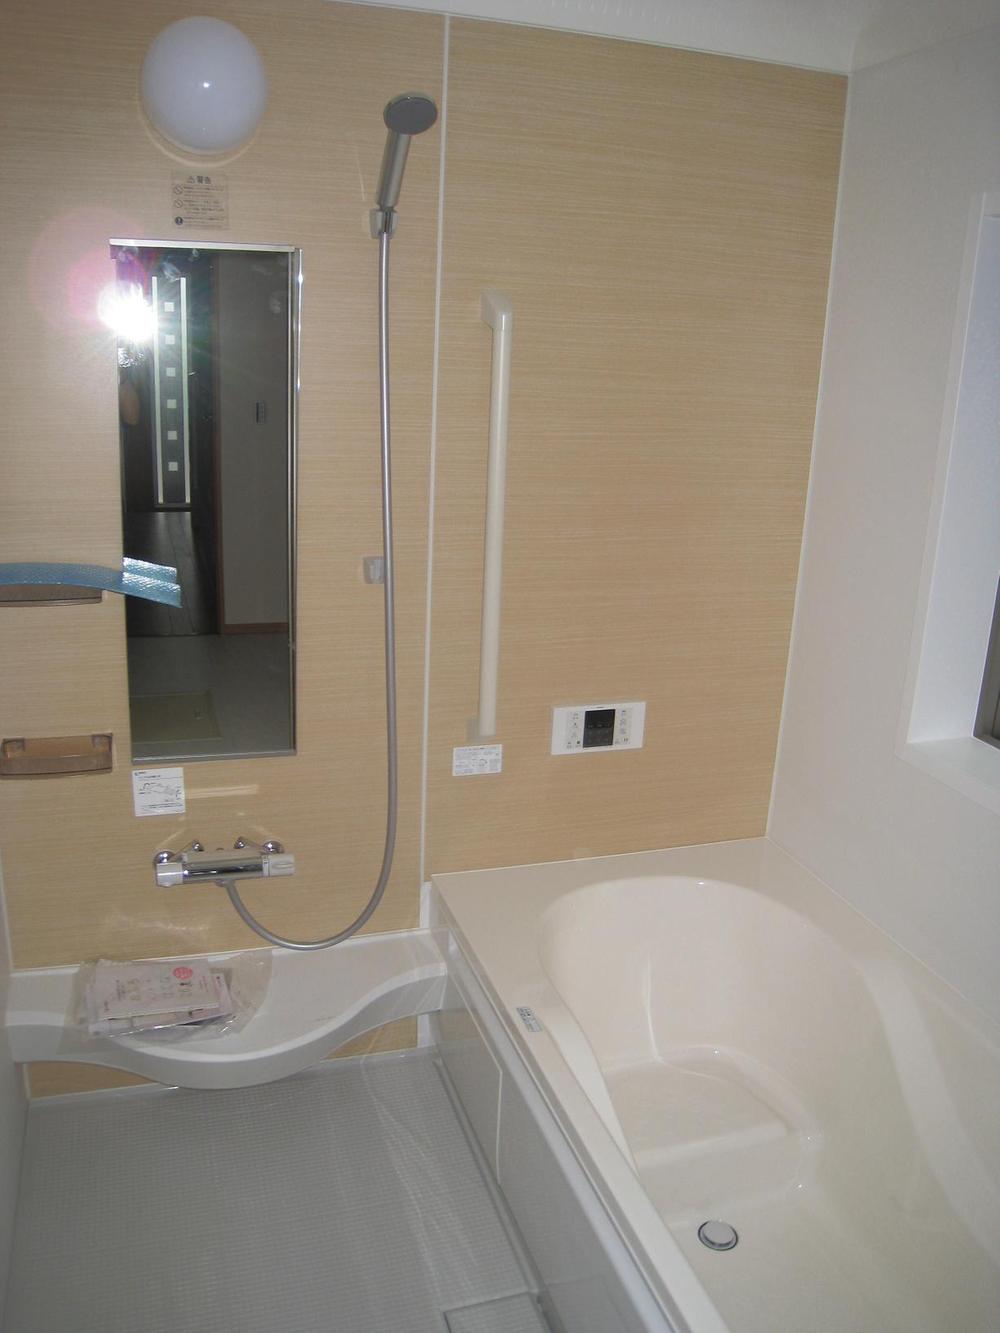 Bathroom. There is difference between the specification color